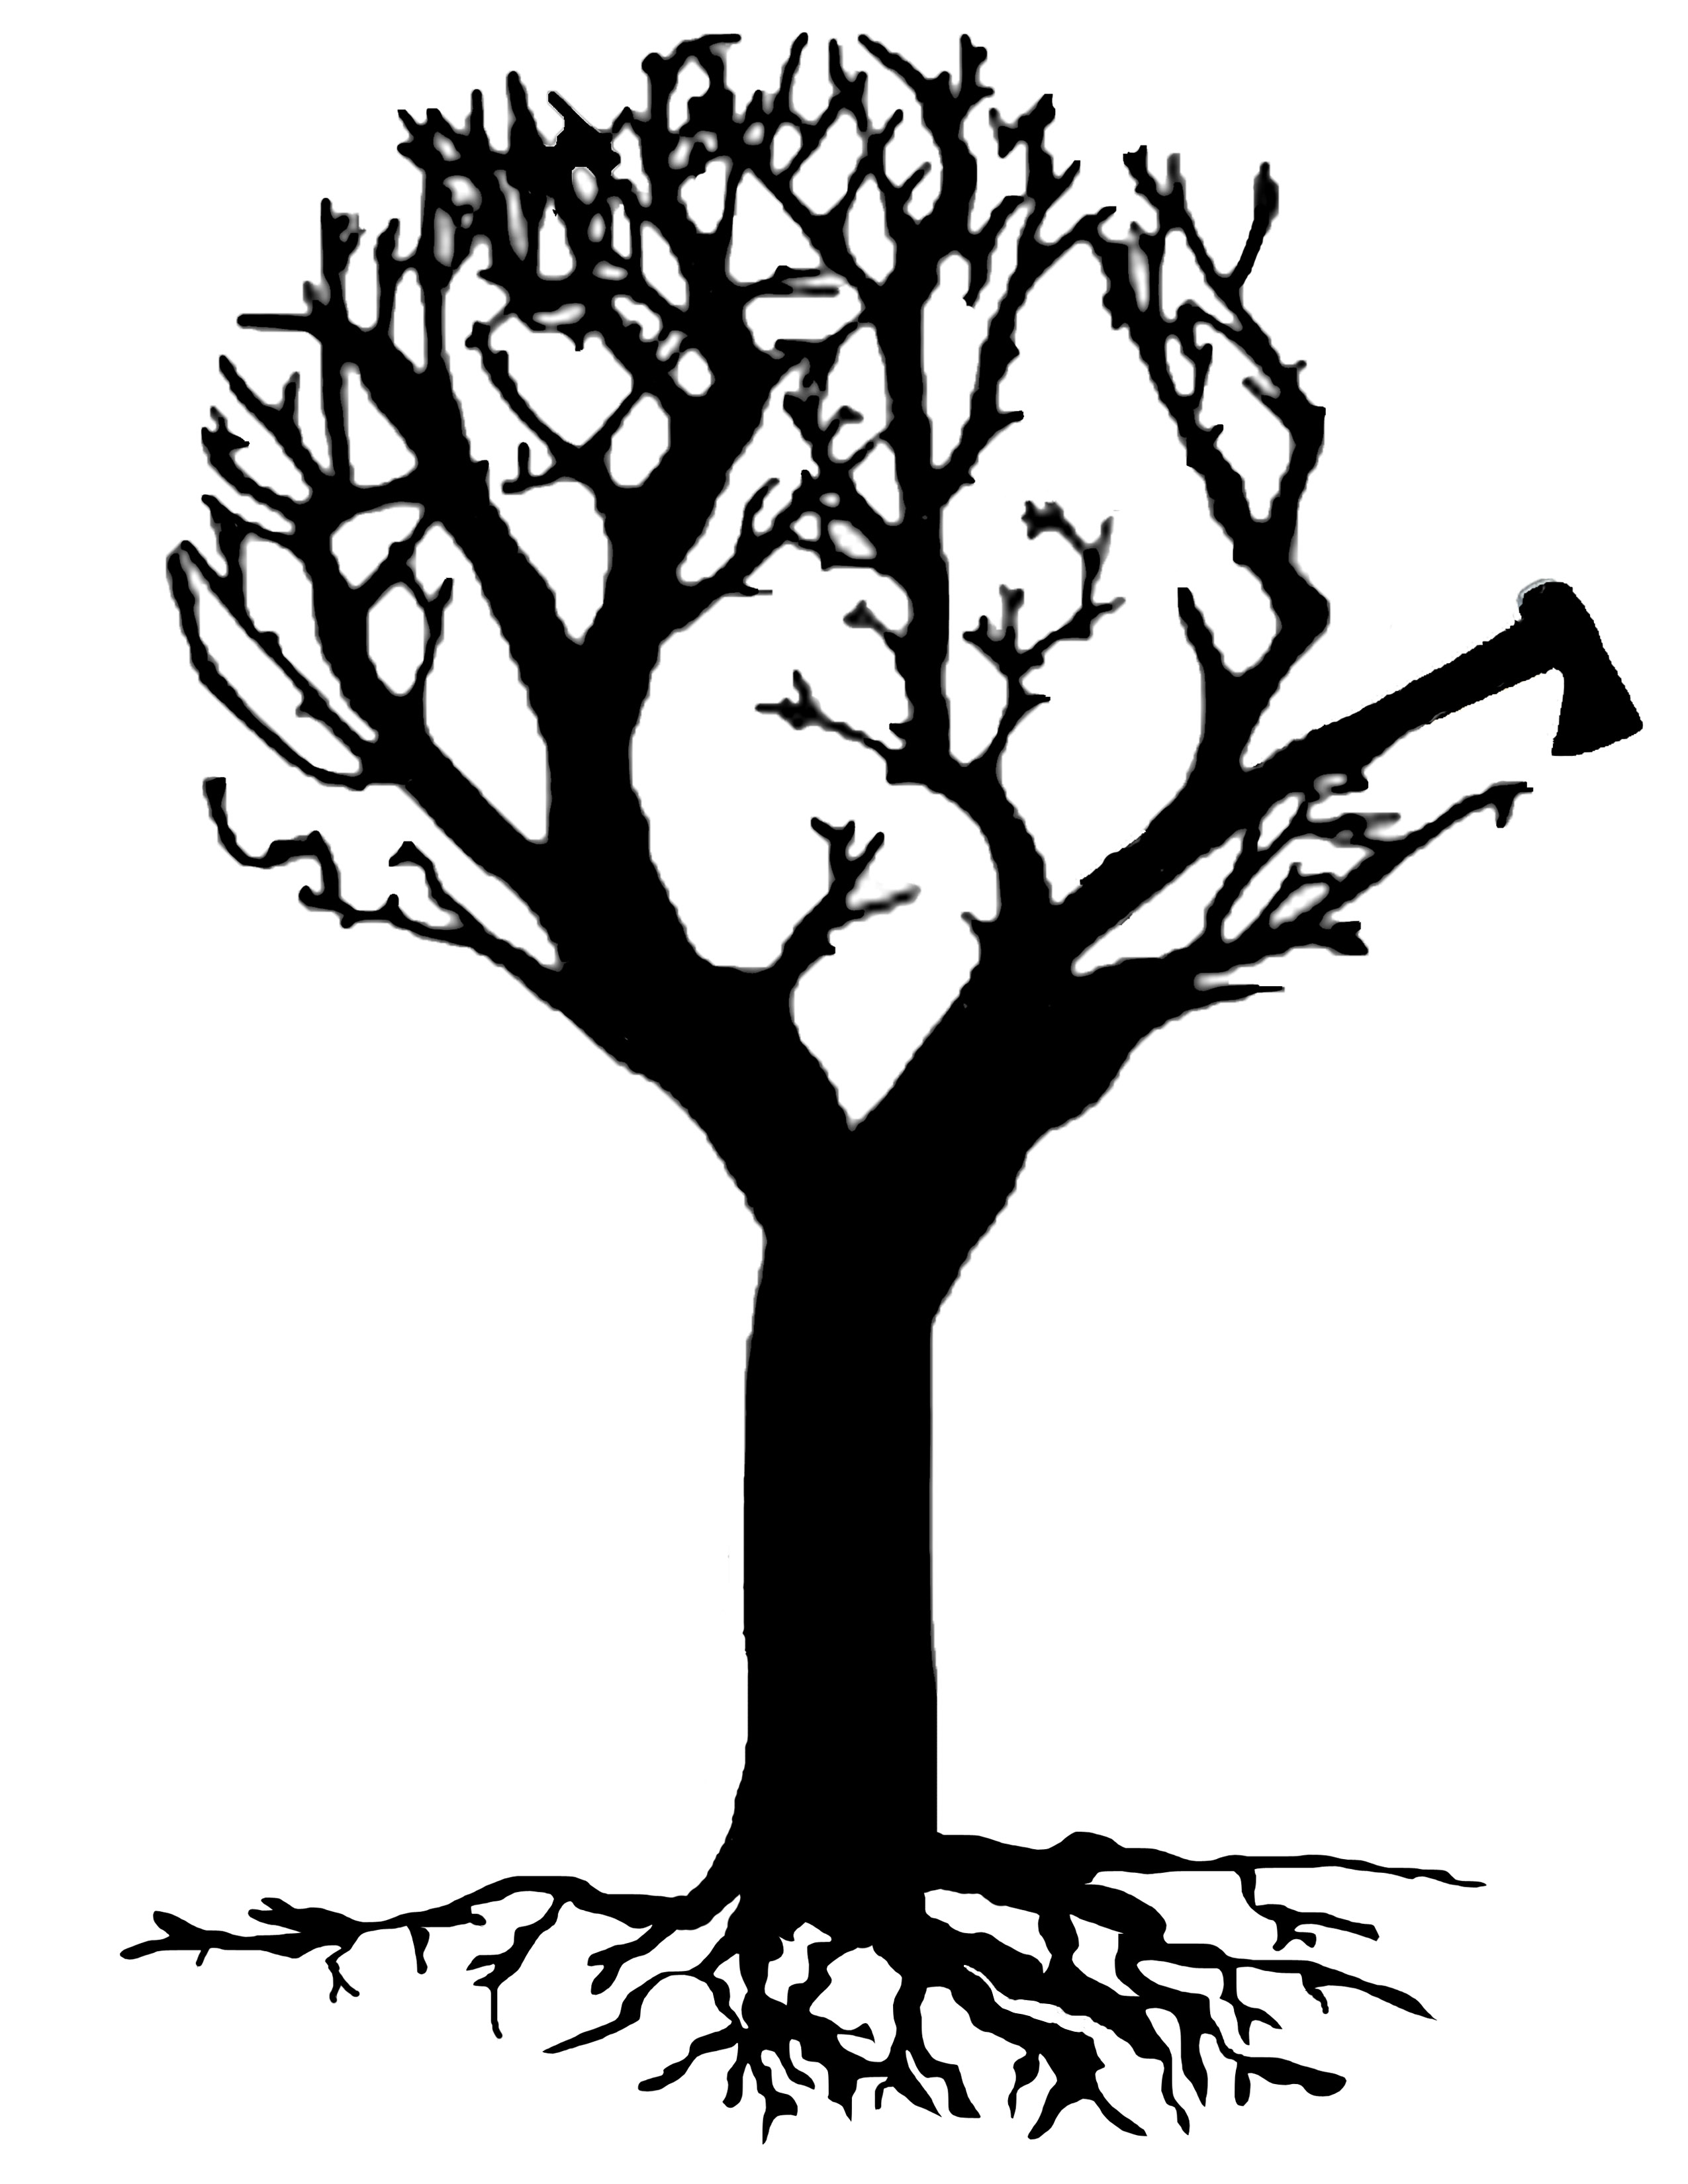 Acacia Tree Silhouette Clipart - Clipart library